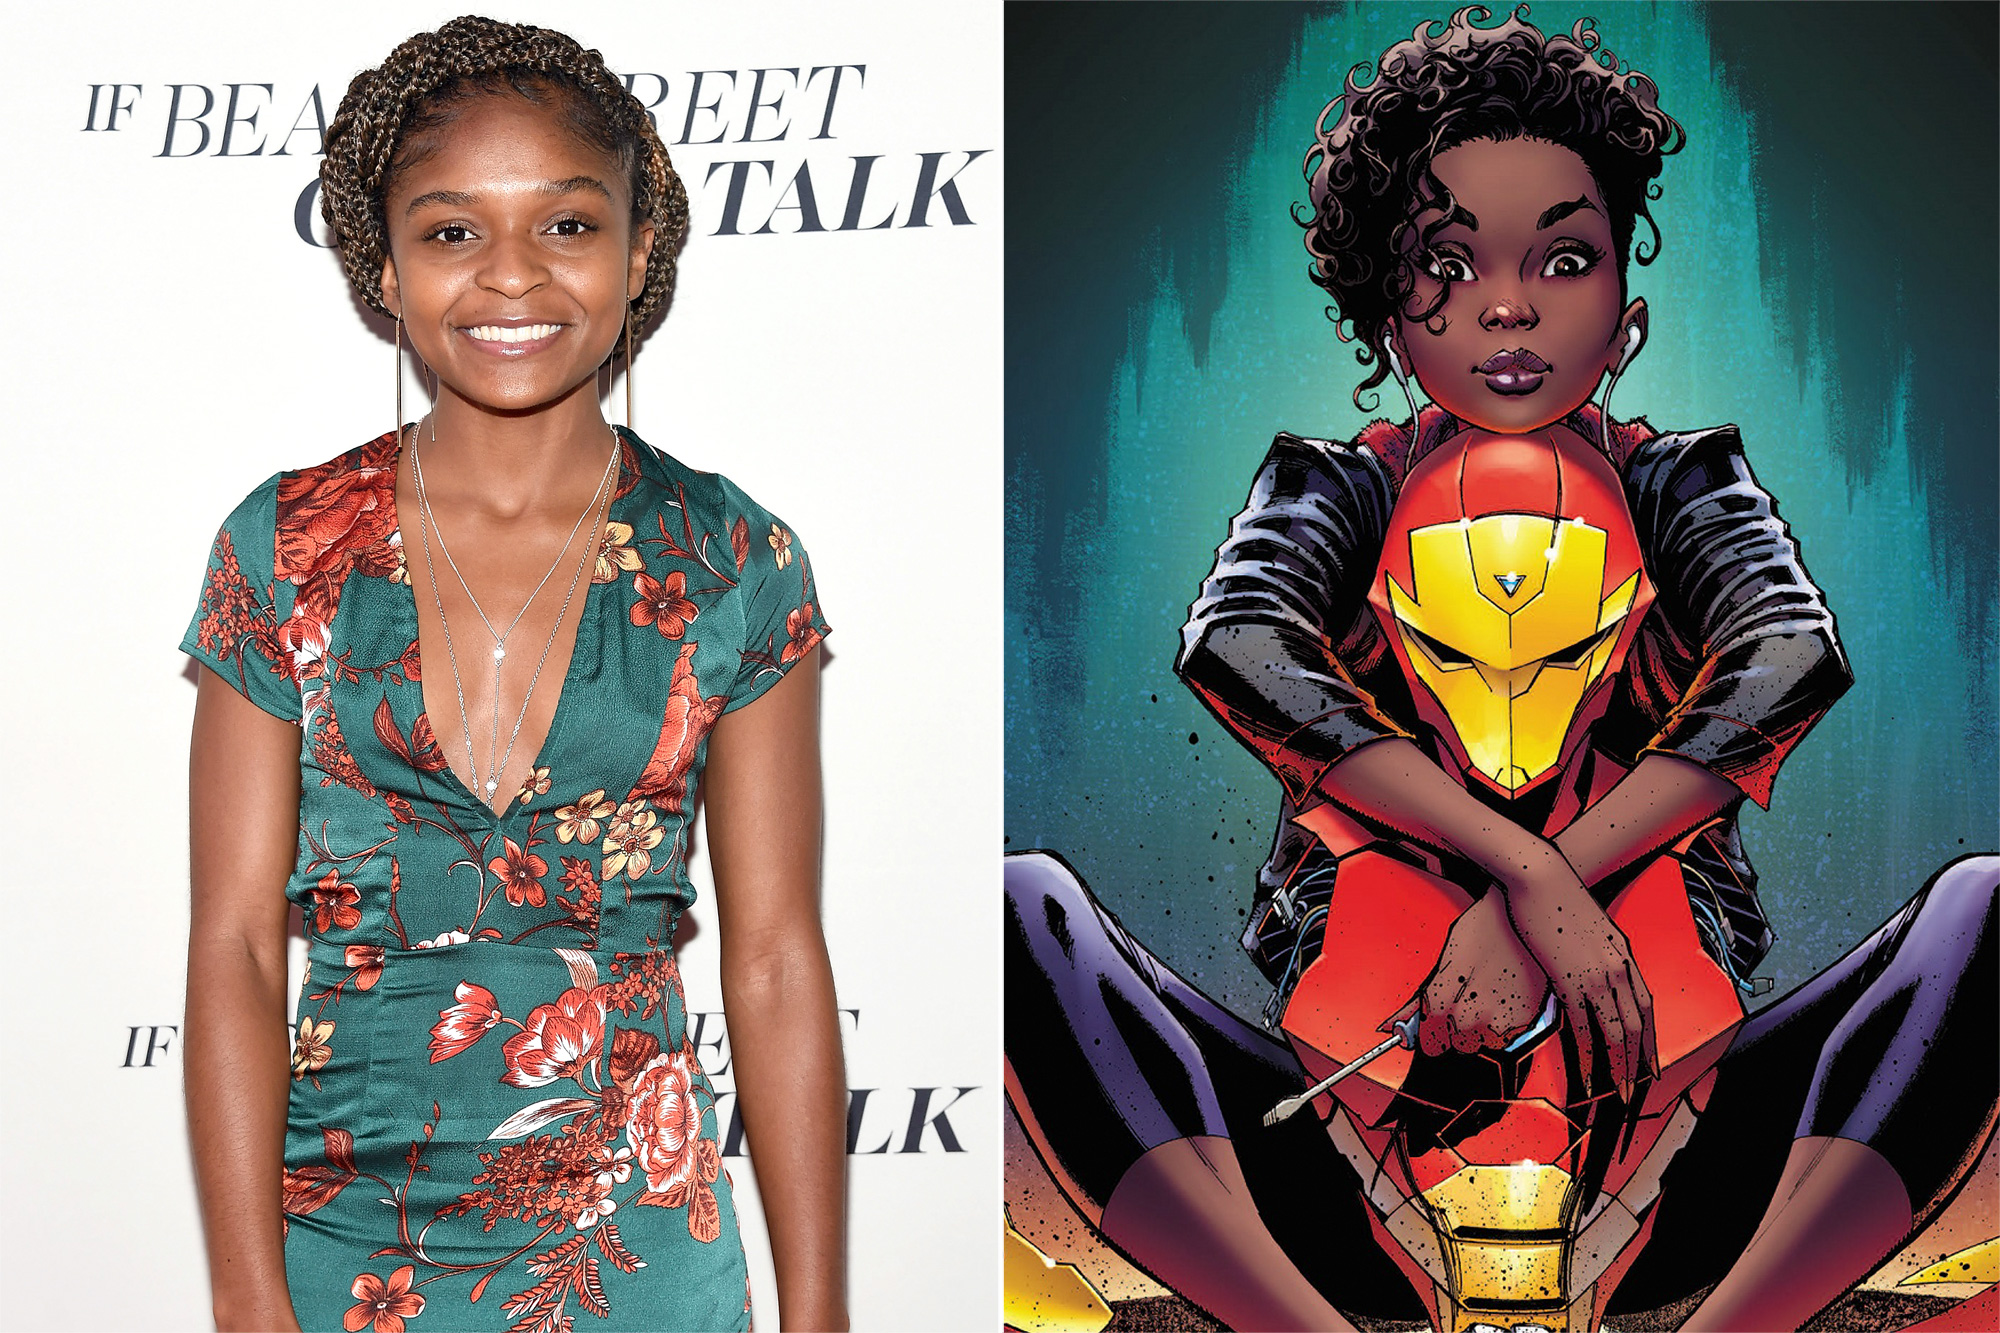 Dominique Thorne will debut as Riri Williams in Black Panther 2, ahead of Ironheart show